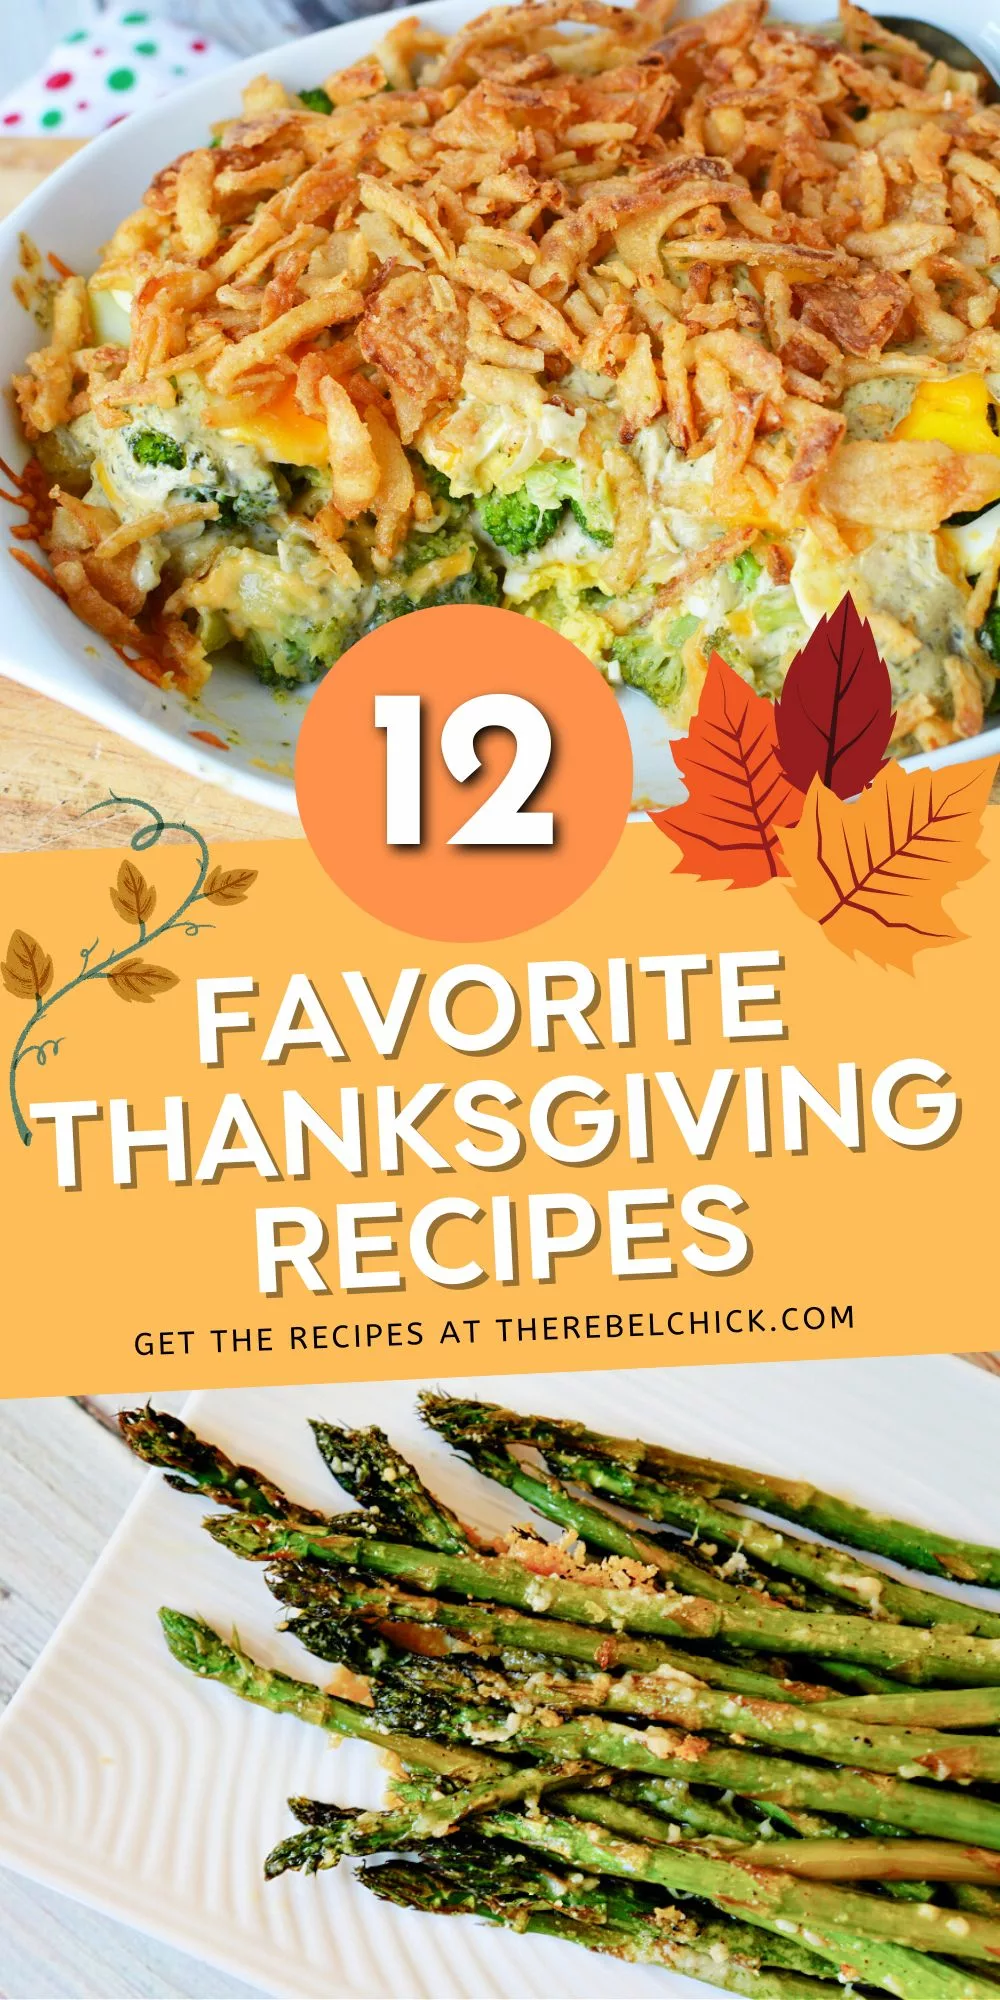 12 Favorite Dishes for Thanksgiving